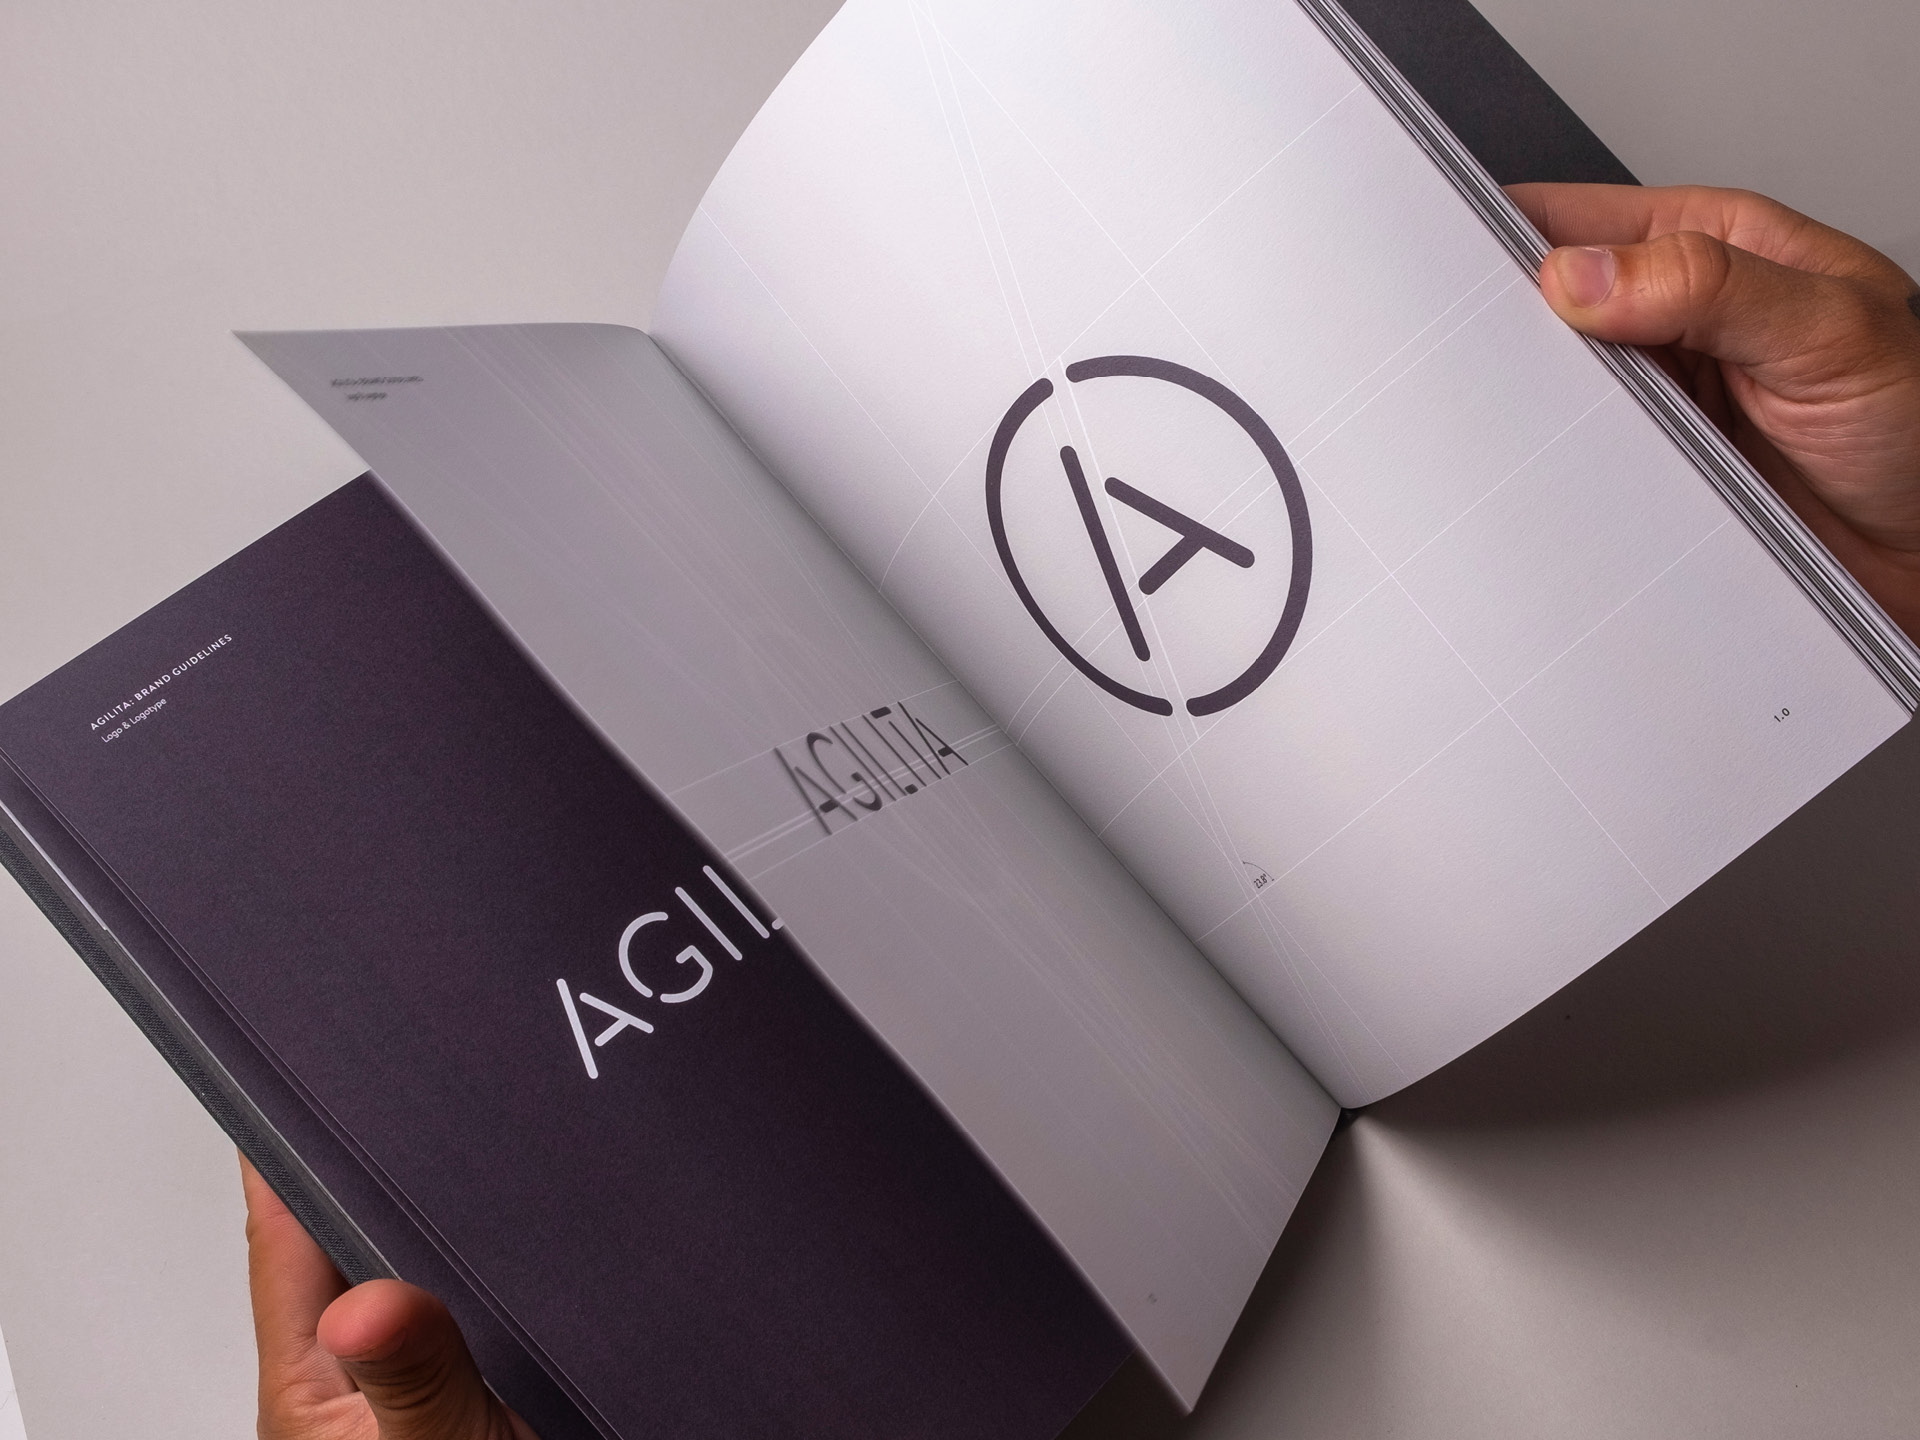 Flicking through the pages of the brand guidelines book detailing the logo and logotype construction